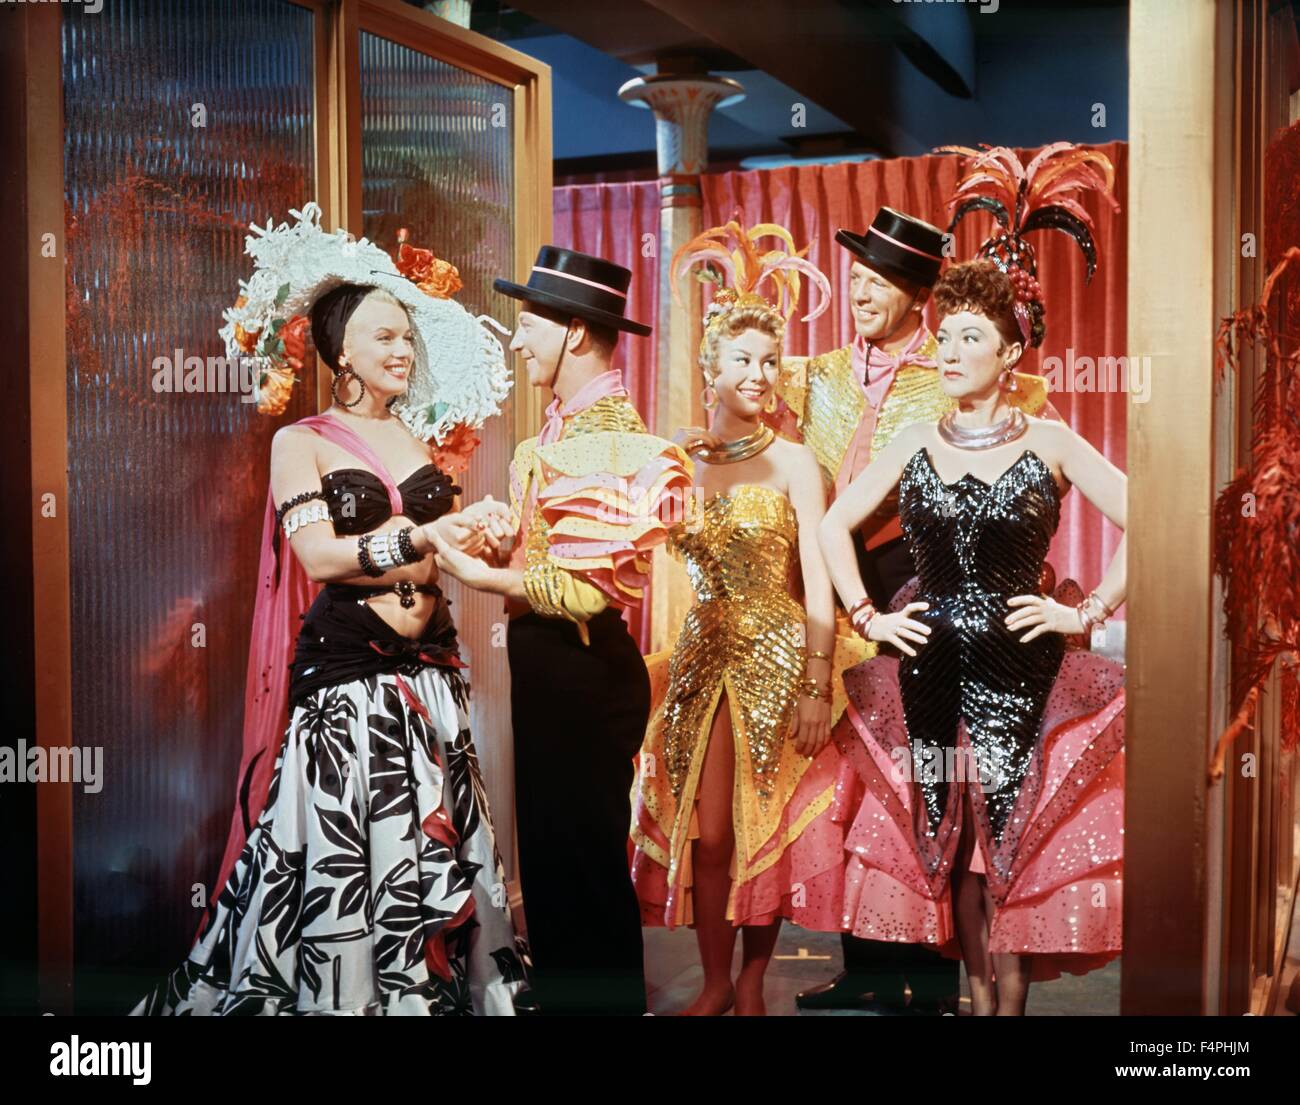 Marilyn Monroe, Donald O'Connor, Mitzi Gaynor, Dan Dailey and Ethel Merman / There's No Business Like Show Business / 1954 directed by Walter Lang [20th C Stock Photo